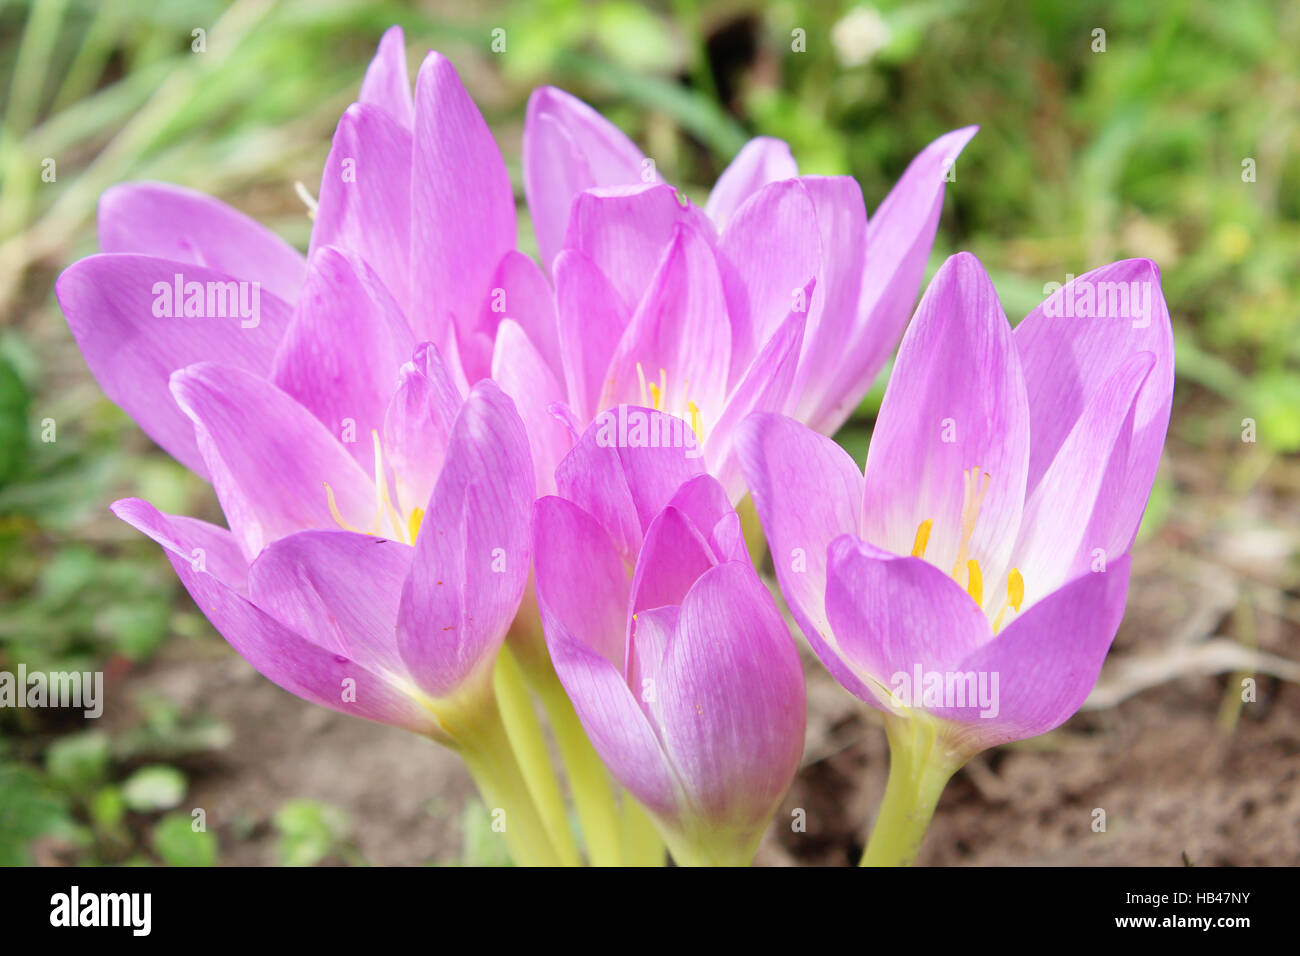 pink flowers of colchicum autumnale Stock Photo